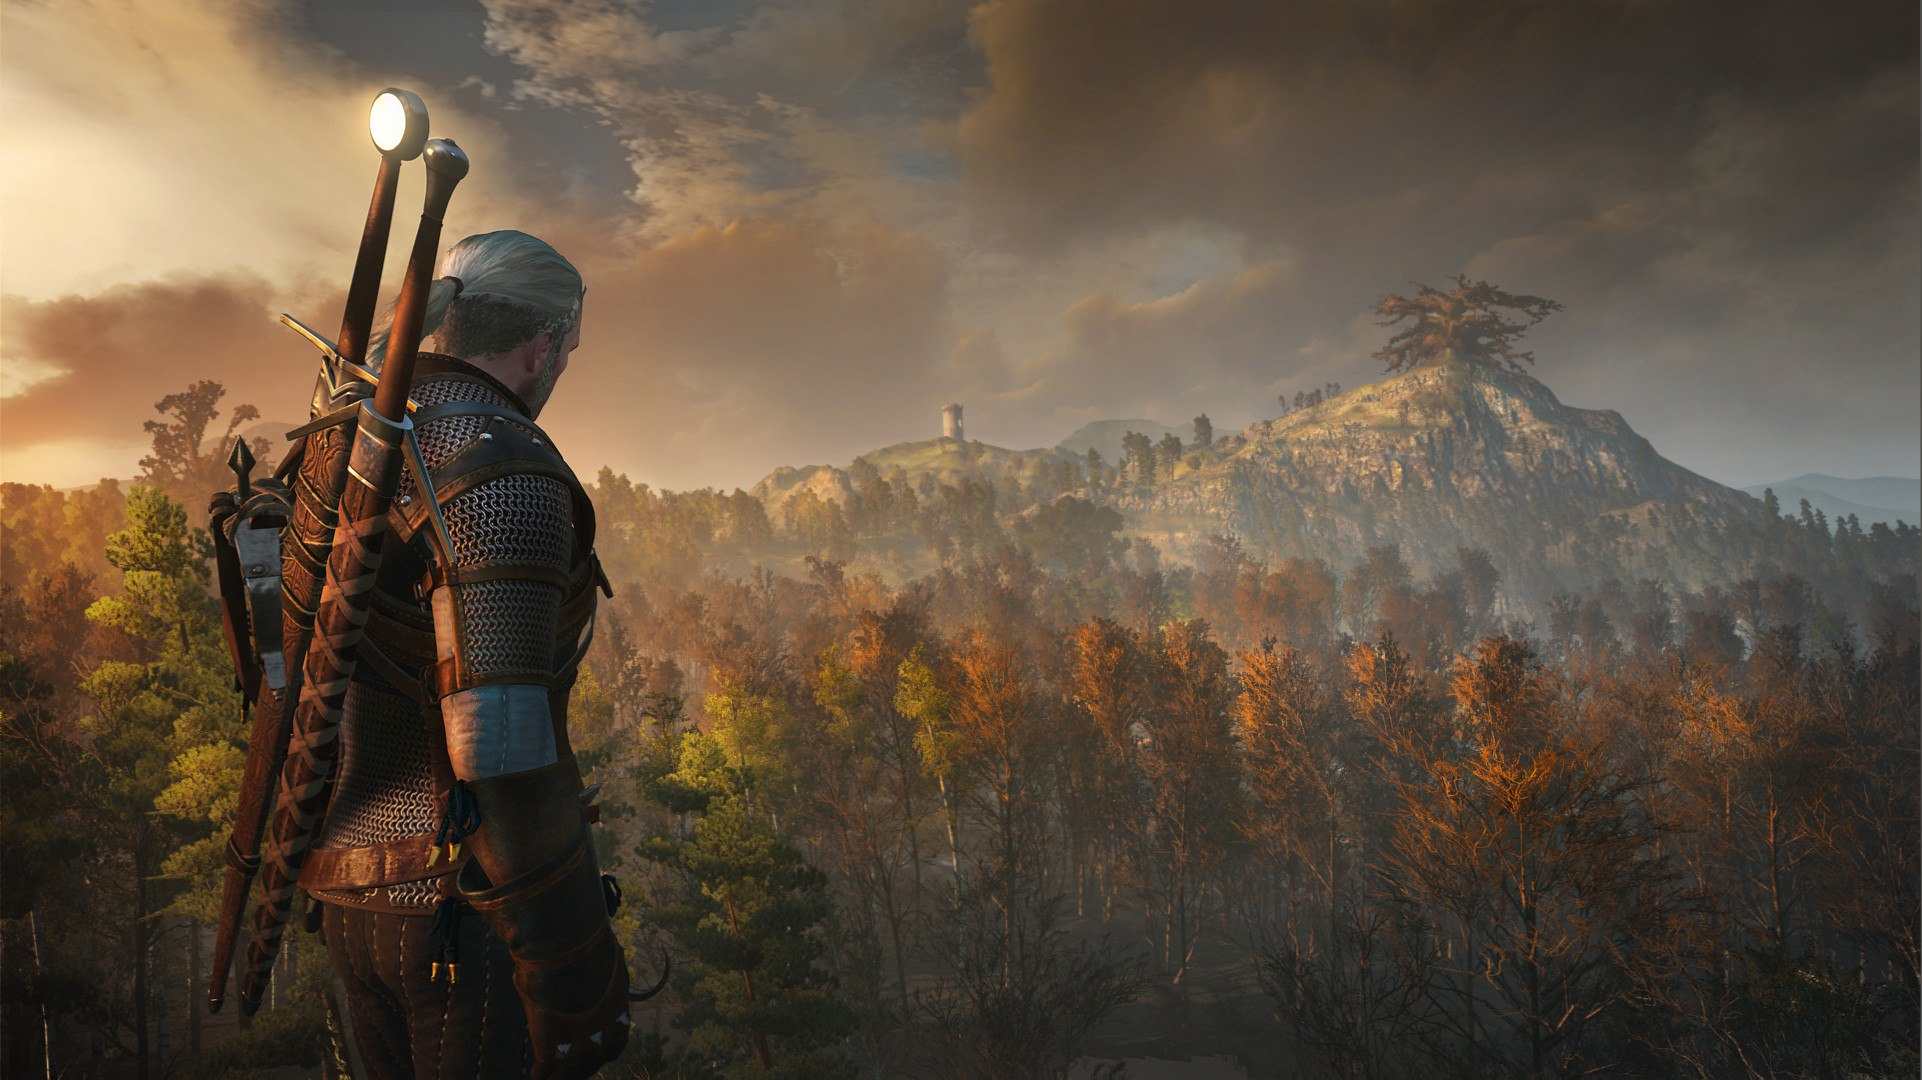 the-witcher-3-interview-envisioning-the-perfect-rpg-gamingbolt-video-game-news-reviews